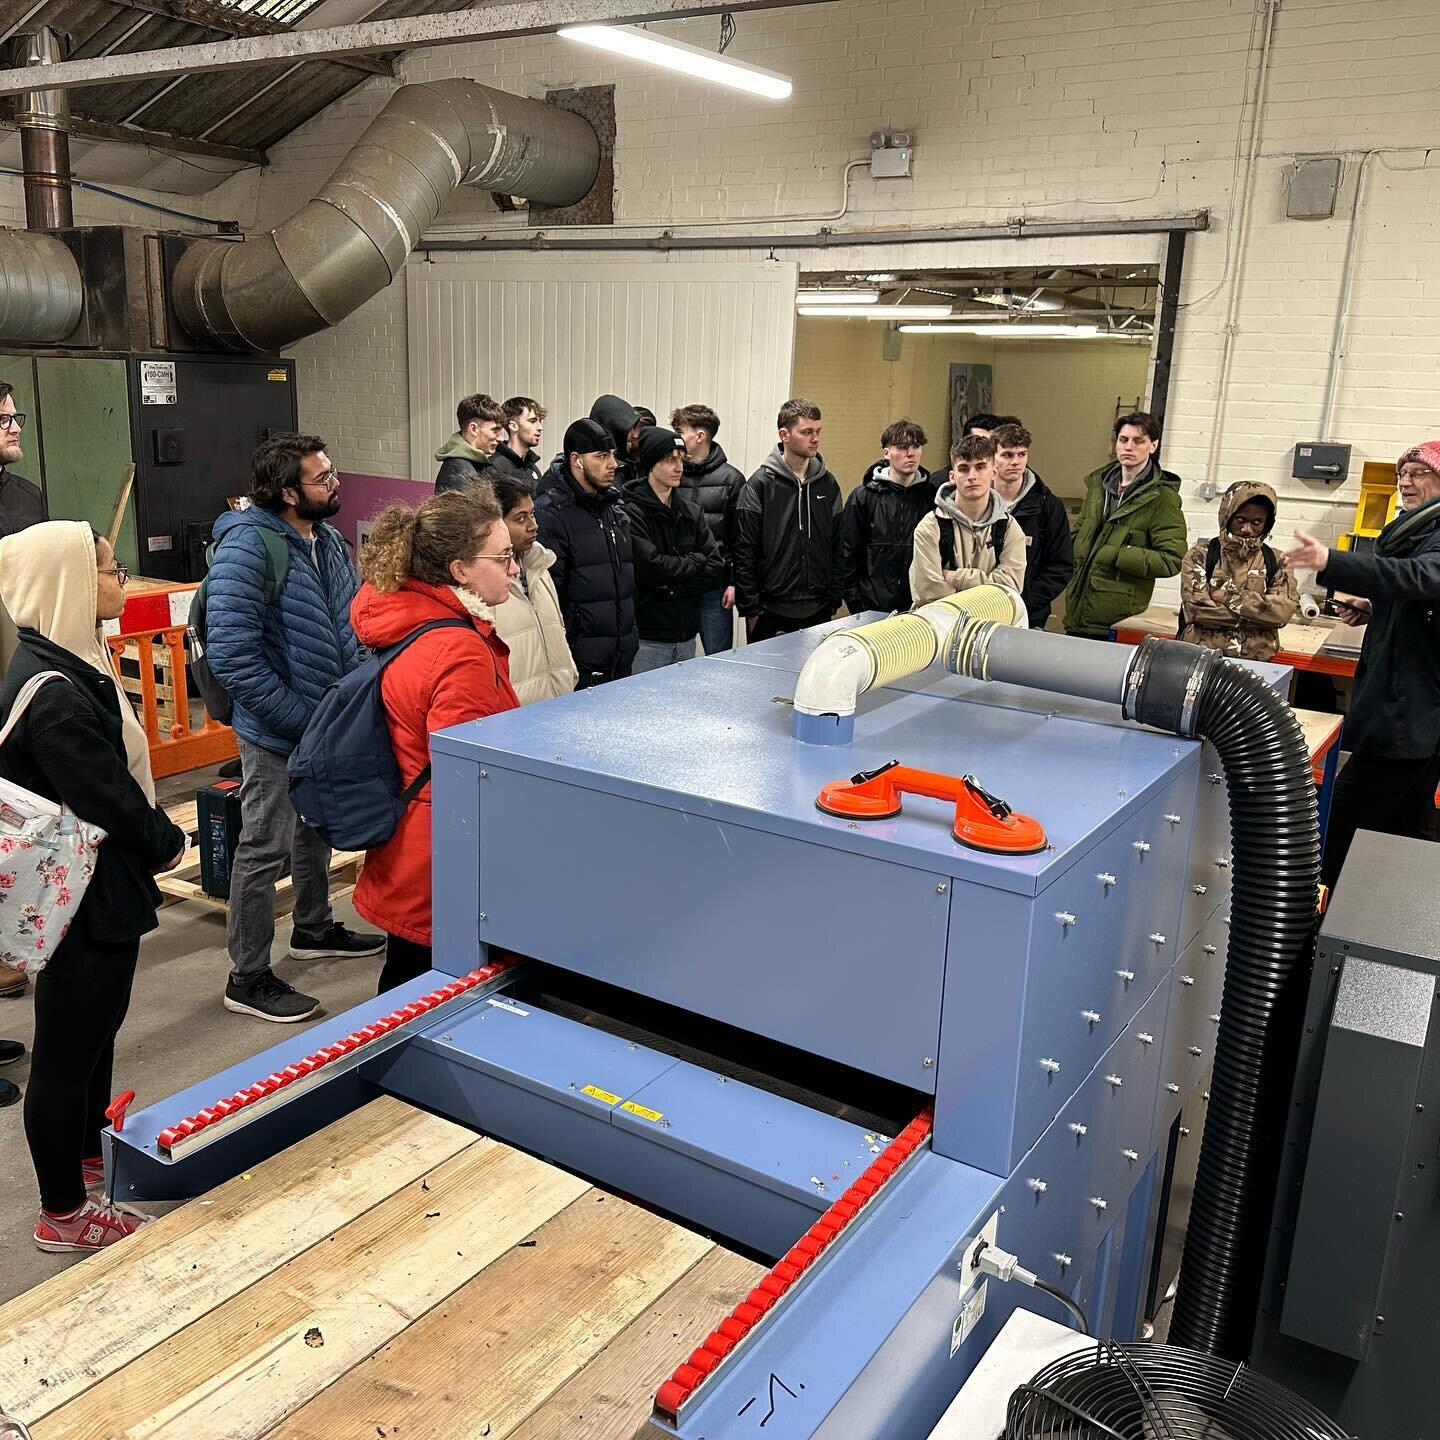 📍Thank you to the Nottingham Trent University Architectural Technology course for visiting Future Makers last week. 

We really enjoyed showing you around the workshop and the brand new product prototypes we&rsquo;ve been working on, all made from 1